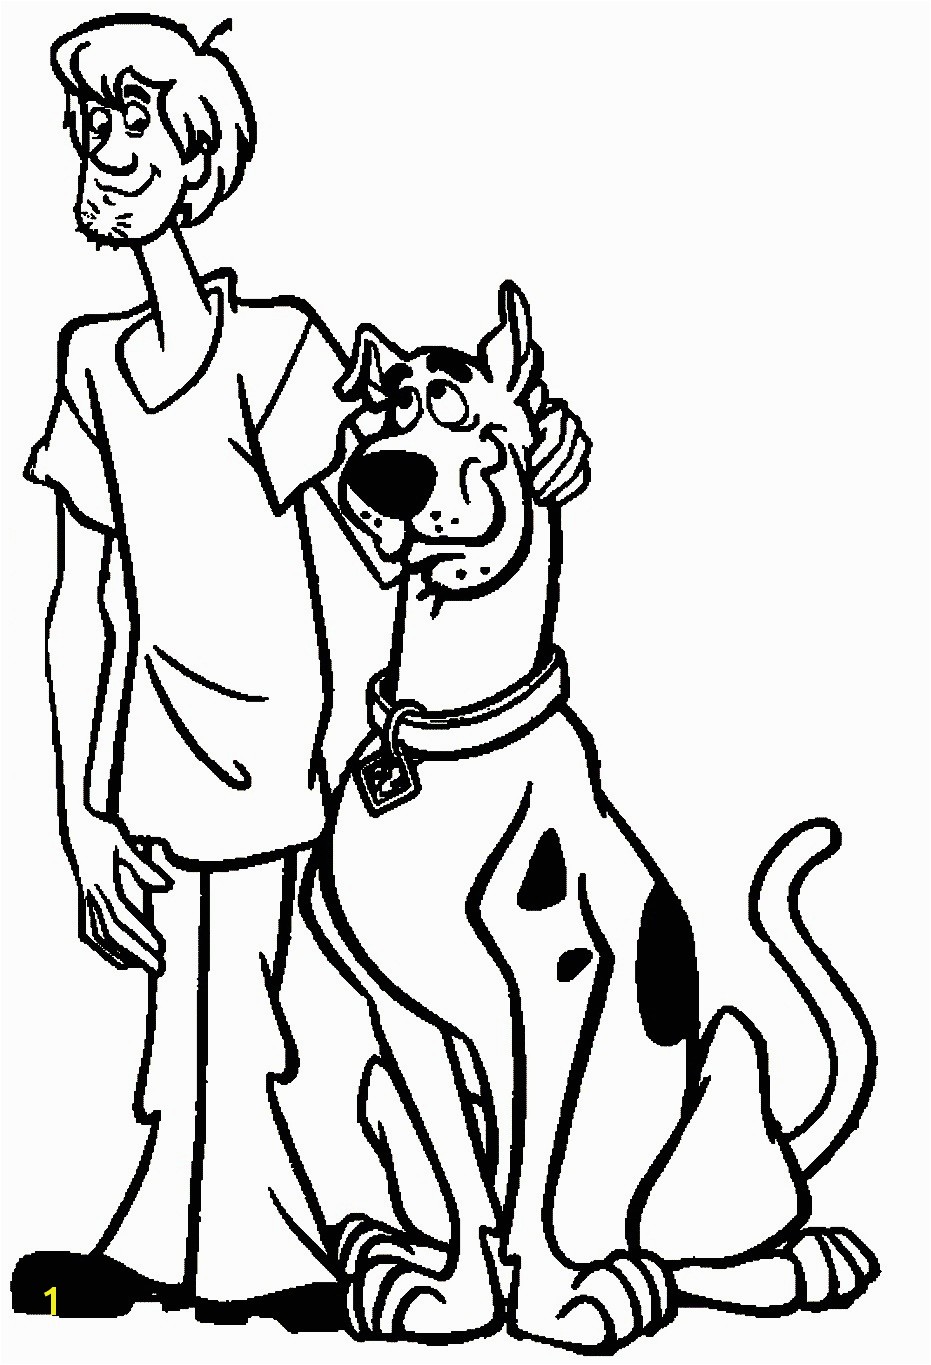 Scooby Doo Easter Coloring Pages Scooby Doo Coloring Pages